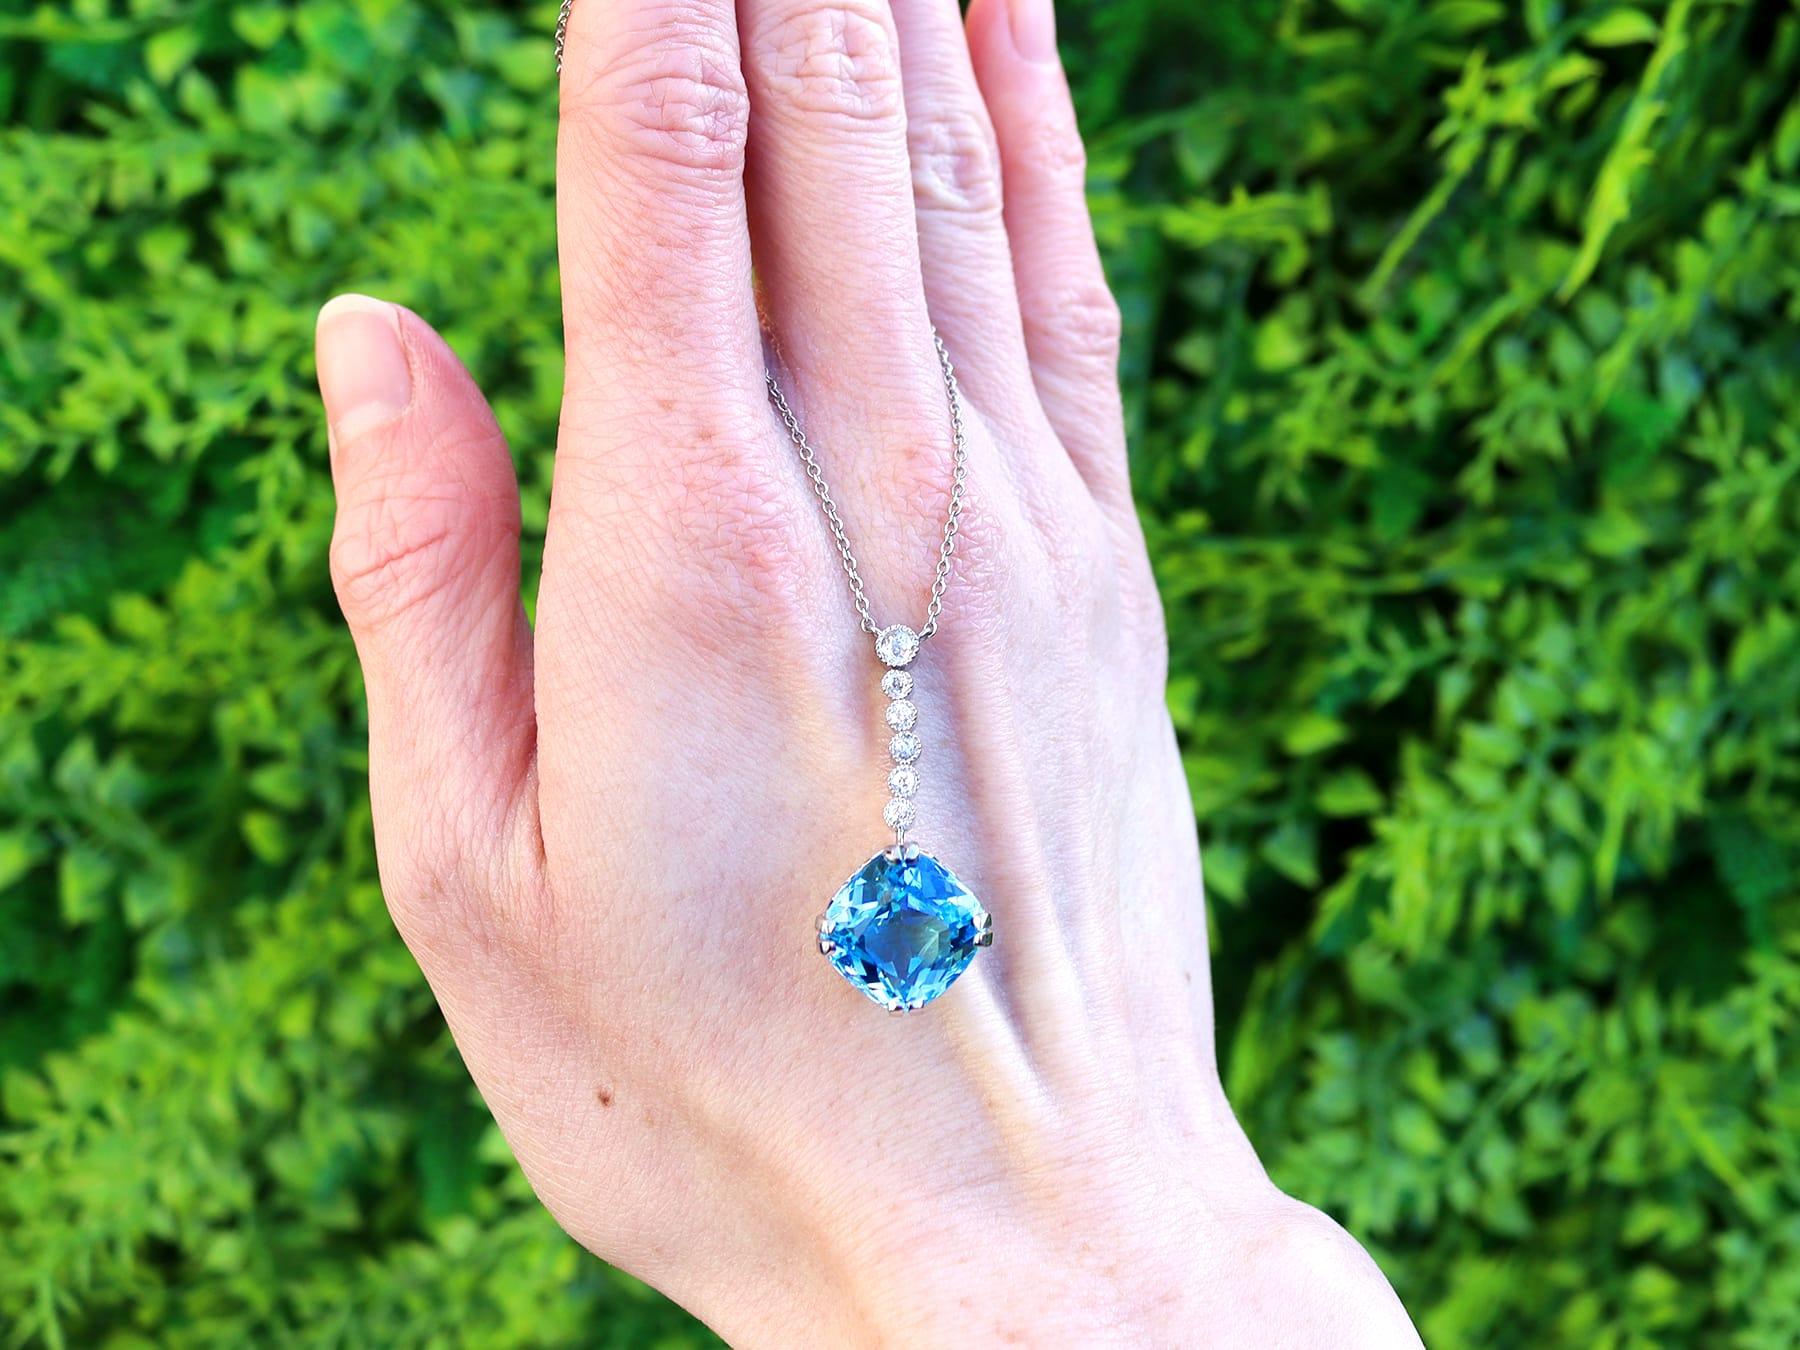 A stunning, fine and impressive antique 6.50 carat aquamarine and 0.28 carat diamond, platinum pendant; part of our aquamarine jewellery collections.

This stunning, fine and impressive antique 1930s aquamarine pendant has been crafted in